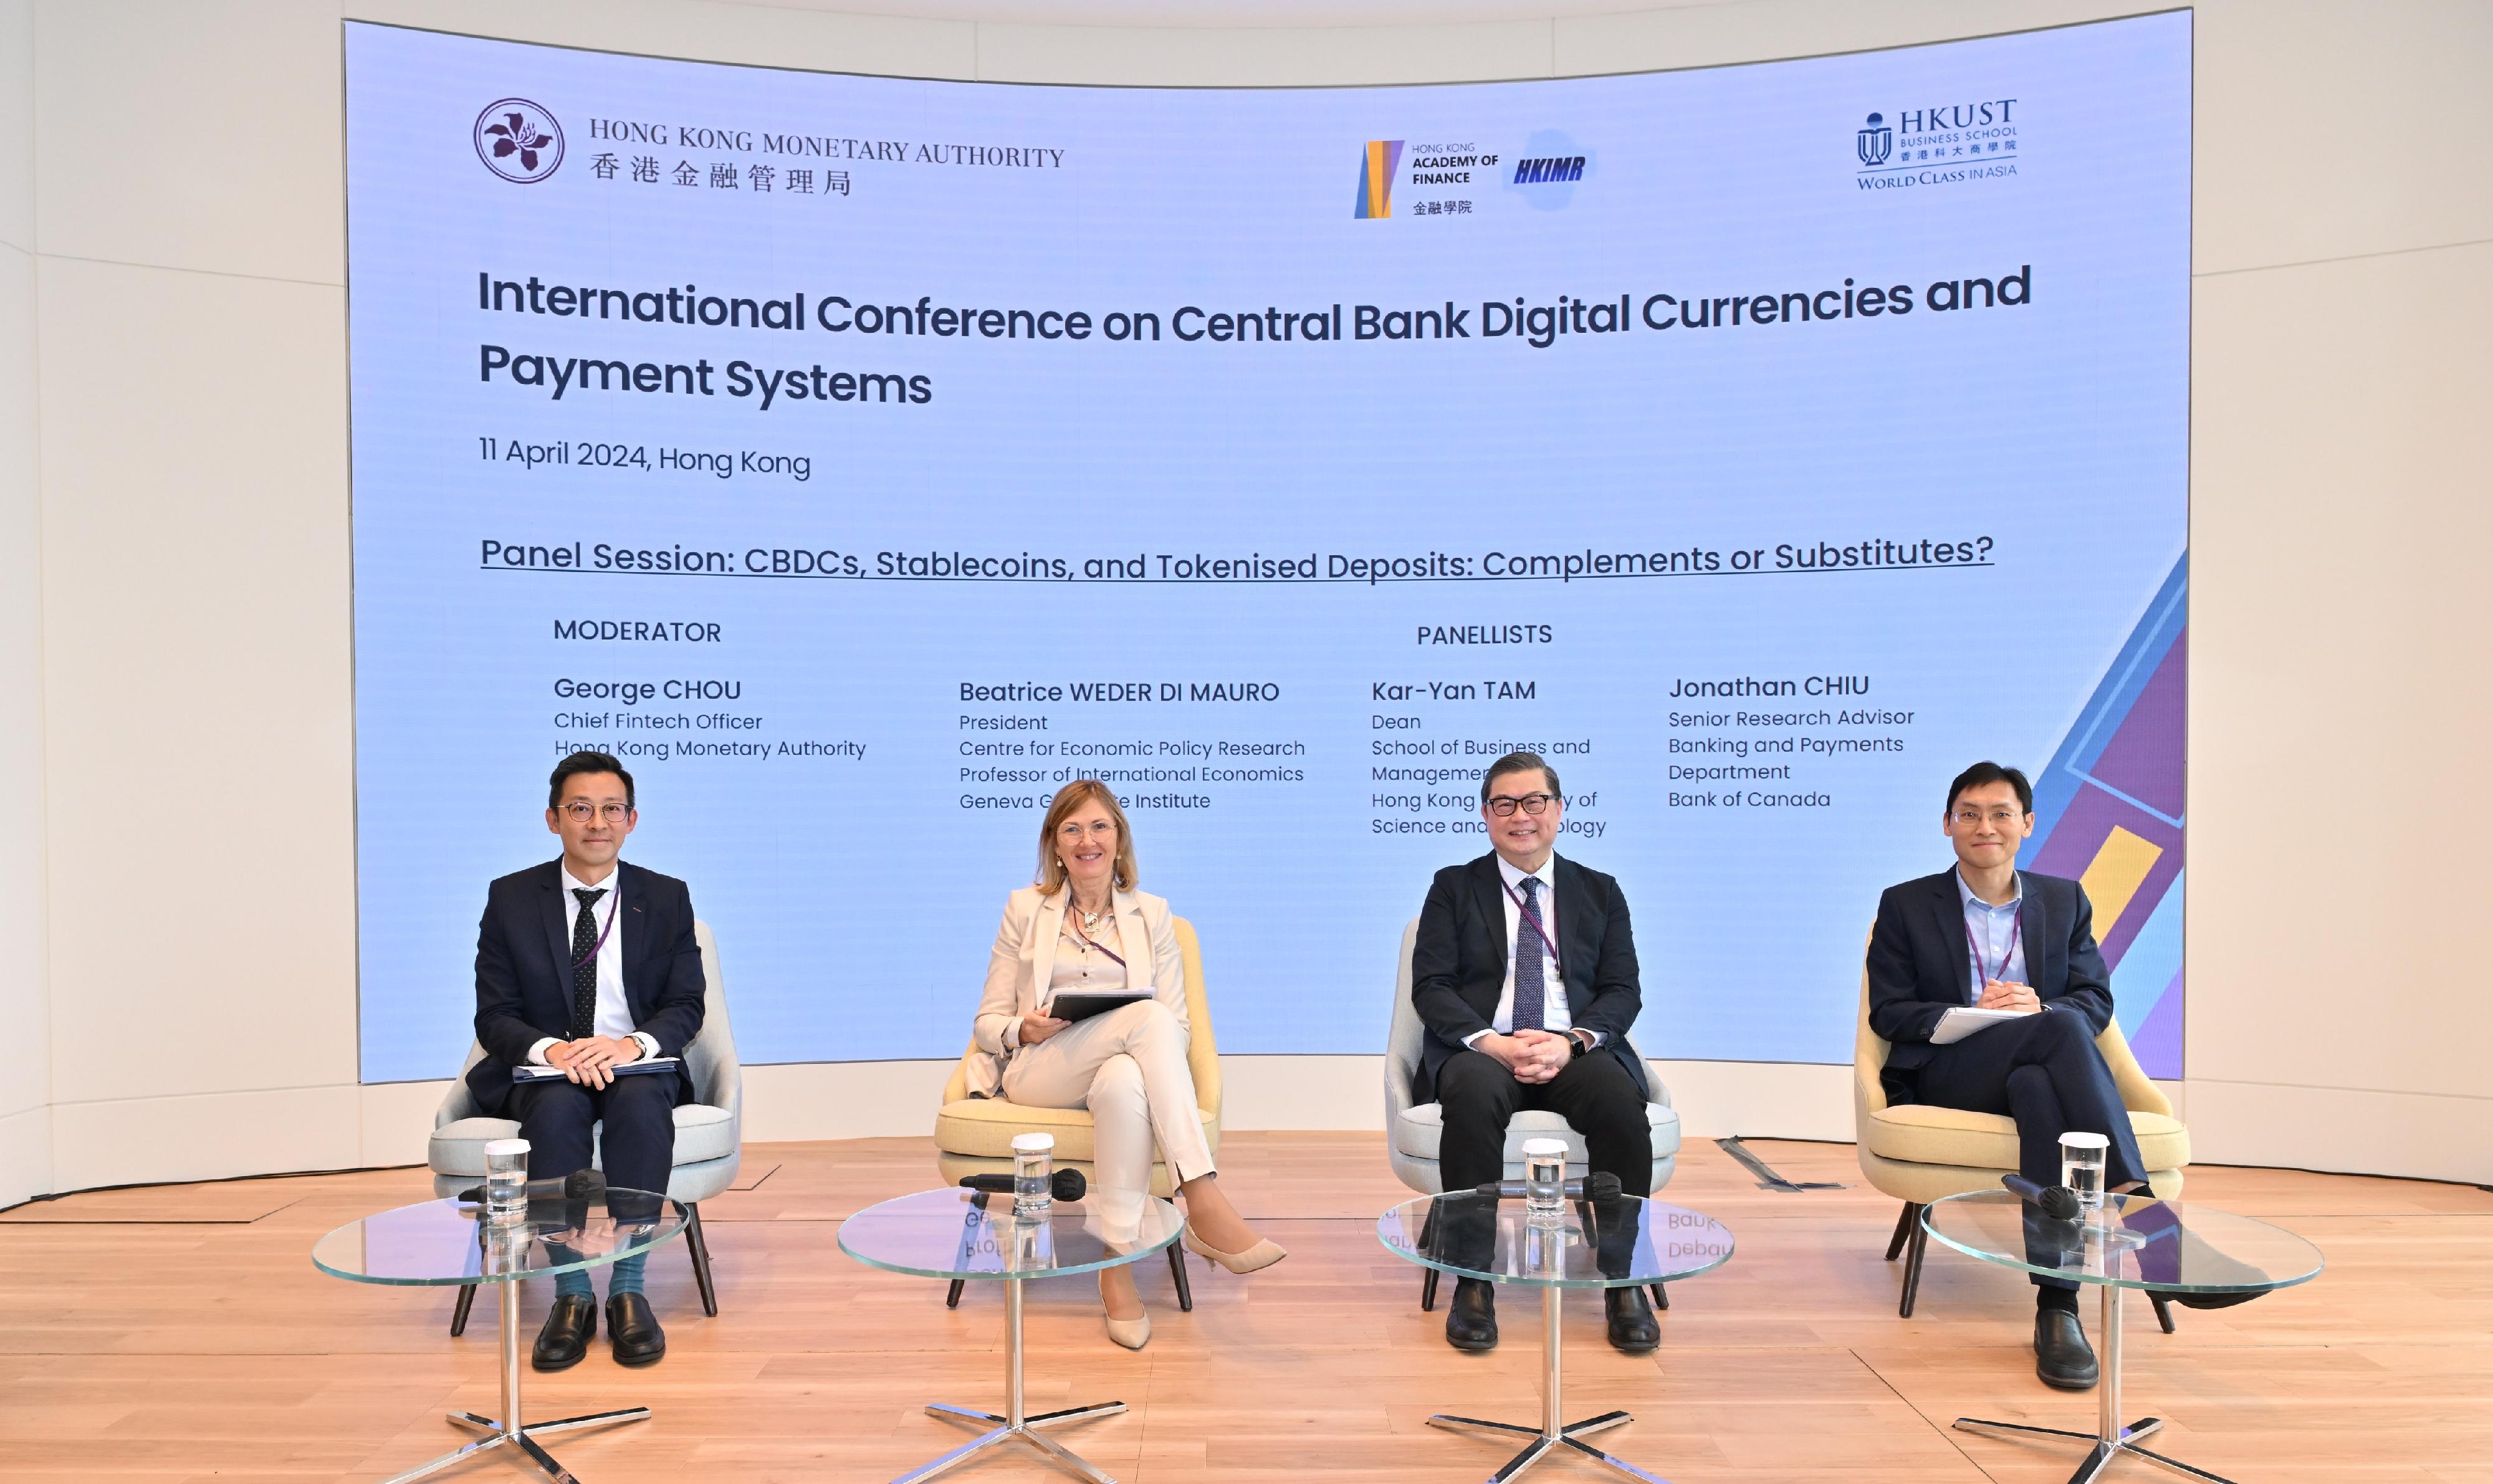 The Chief Fintech Officer of the Hong Kong Monetary Authority, Mr George Chou, moderates a panel discussion titled "CBDCs, Stablecoins, and Tokenised Deposits: Complements or Substitutes?" with Senior Research Advisor, Banking and Payments Department of Bank of Canada, Dr Jonathan Chiu; the Dean, School of Business and Management of The Hong Kong University of Science and Technology, Professor Tam Kar-yan; and the President of Centre for Economic Policy Research and Professor of International Economics of Geneva Graduate Institute, Professor Beatrice Weder Di Mauro.